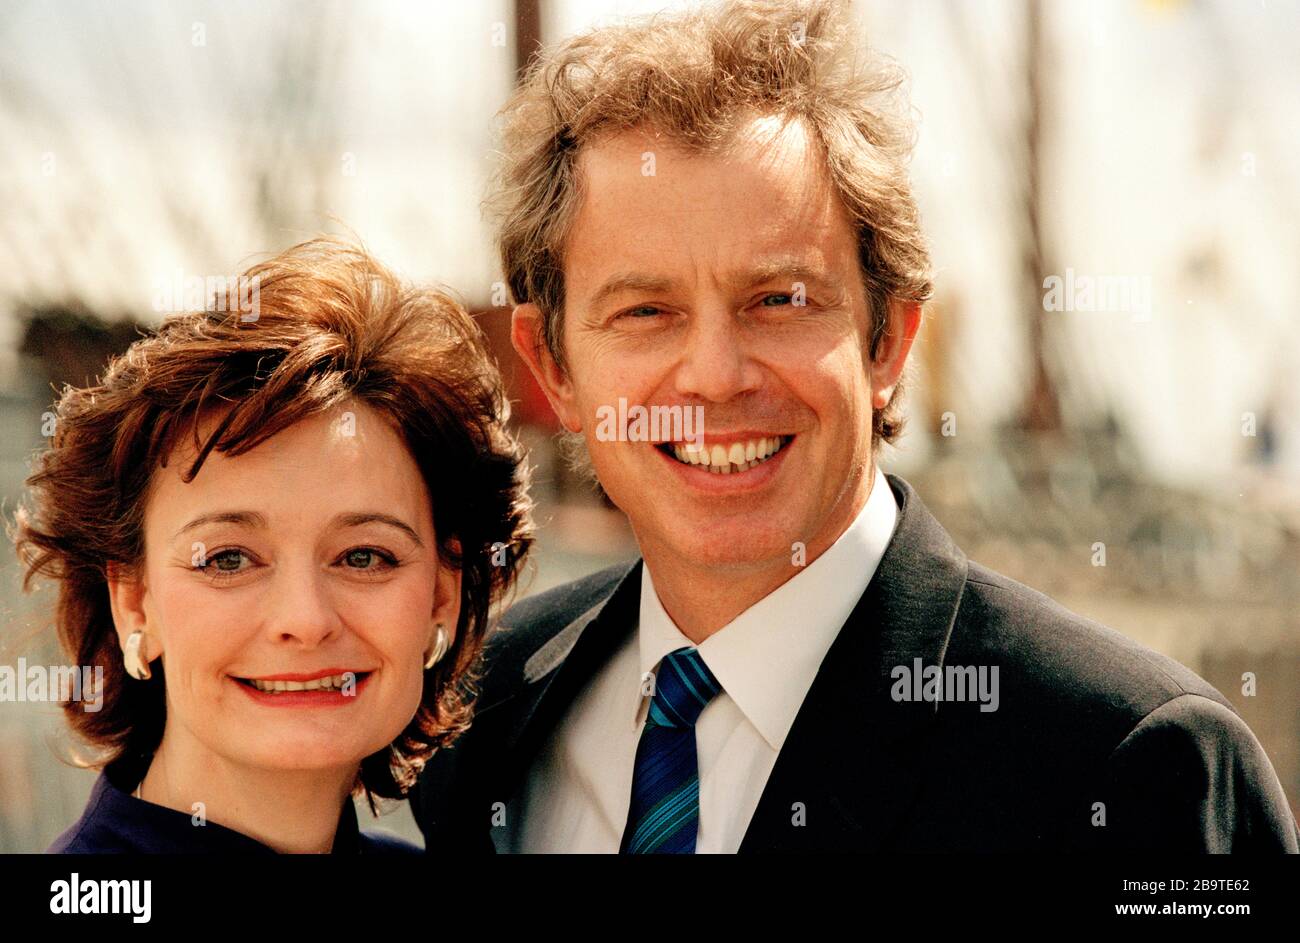 Tony Blair, former Prime Minister of UK, with wife Cherie. in Dundee, Scotland. Stock Photo